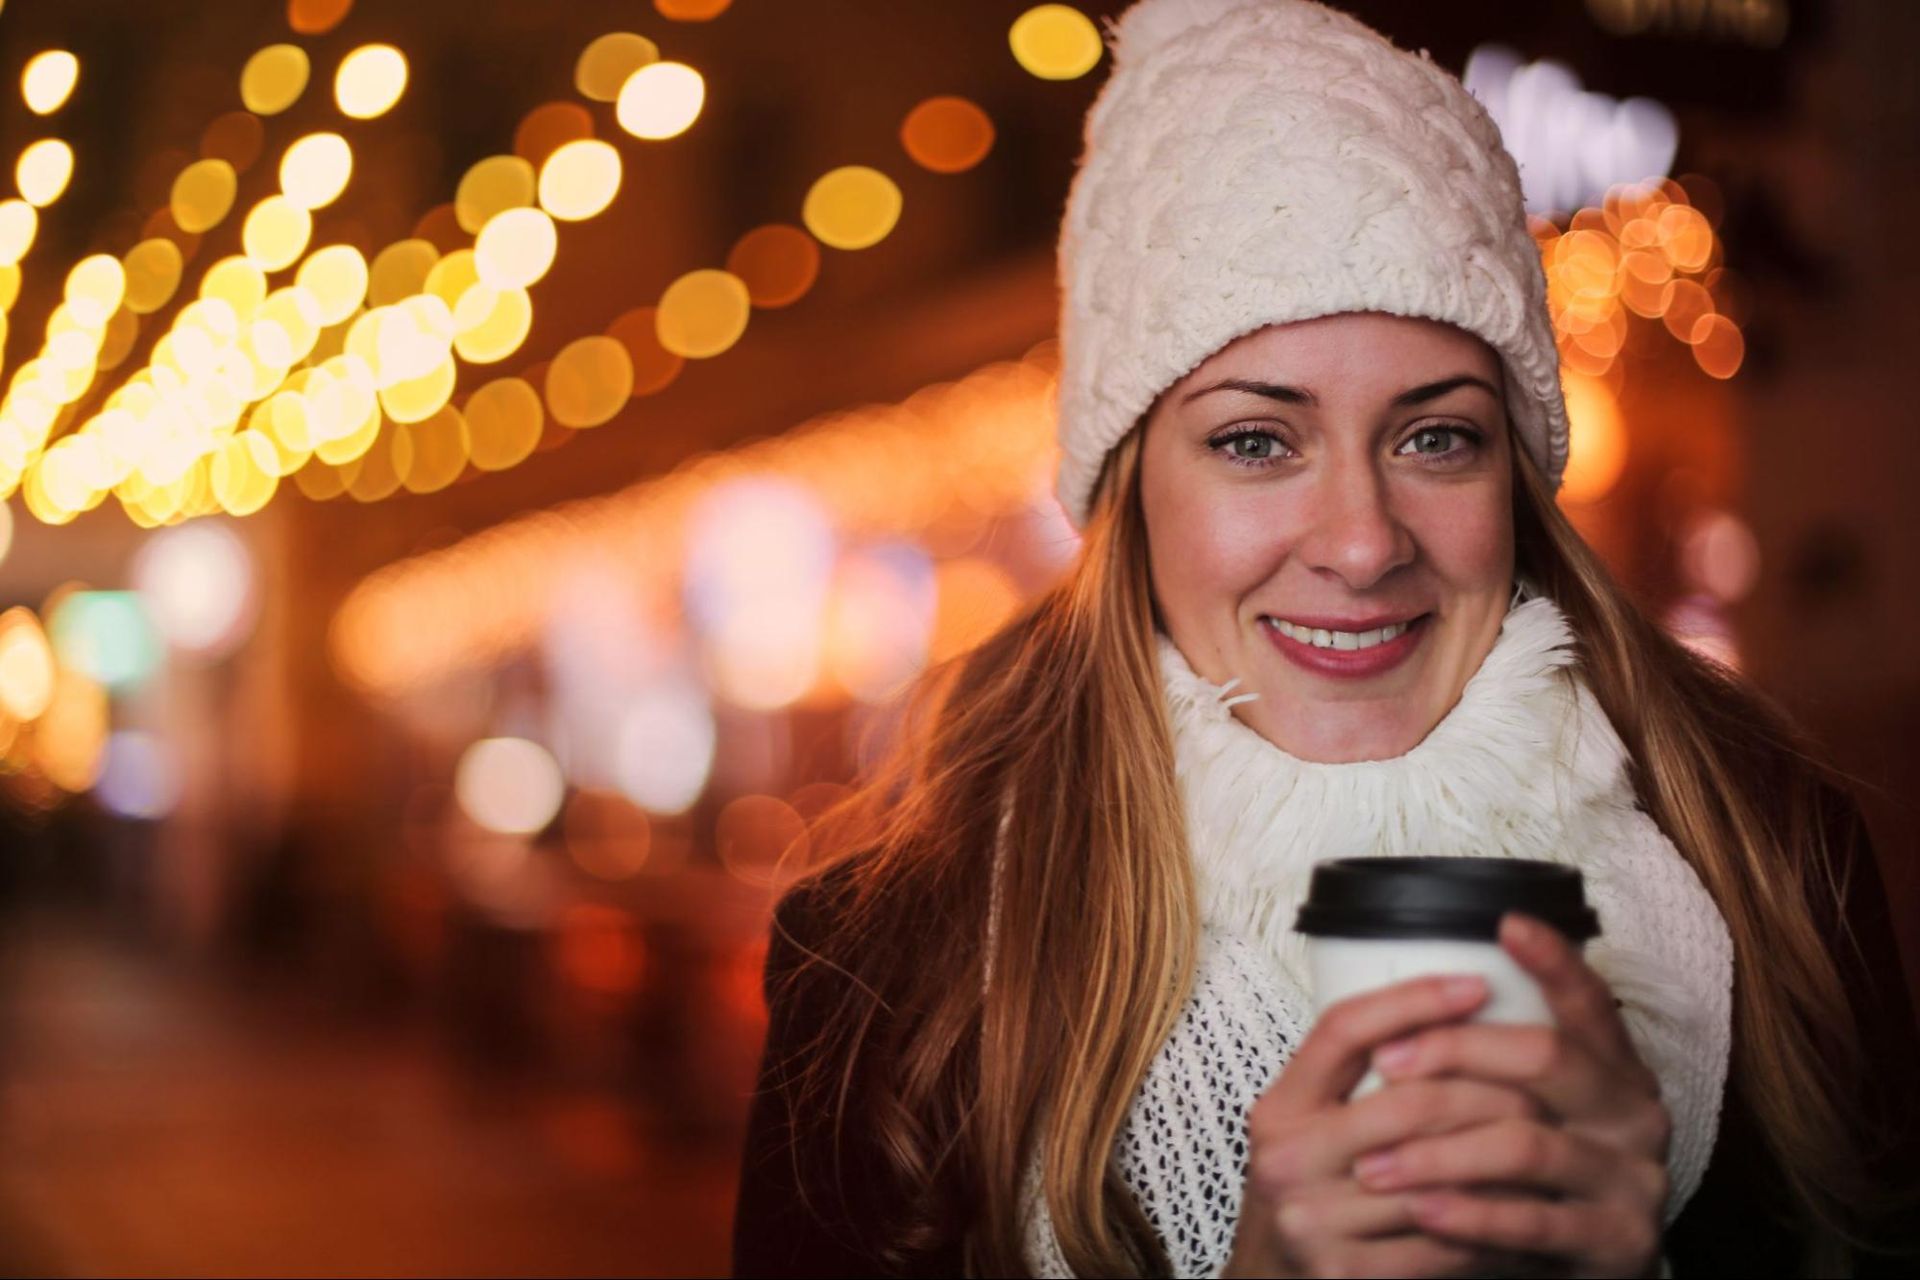 A girl holding a cup of coffee with bokeh lights as background